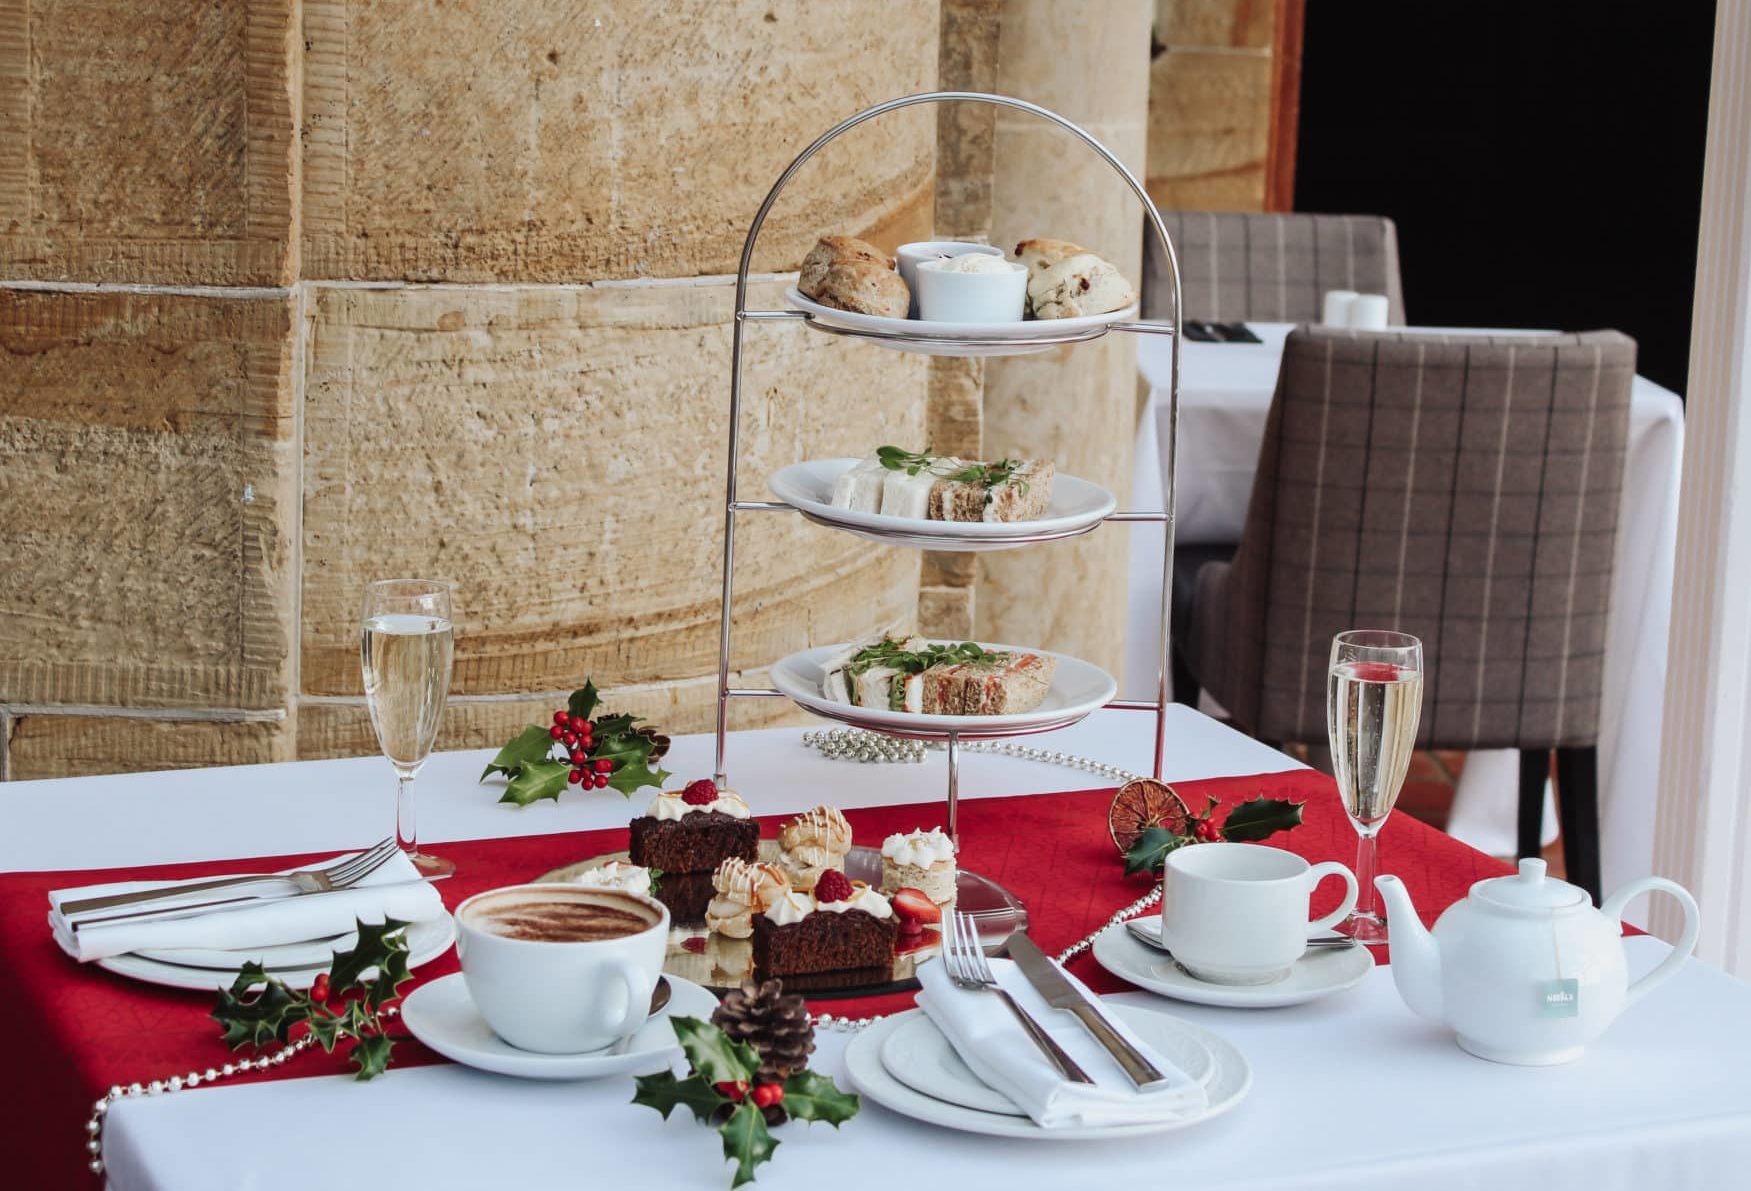 Afternoon tea with prosecco set for two with sandwiches, scones and pastries